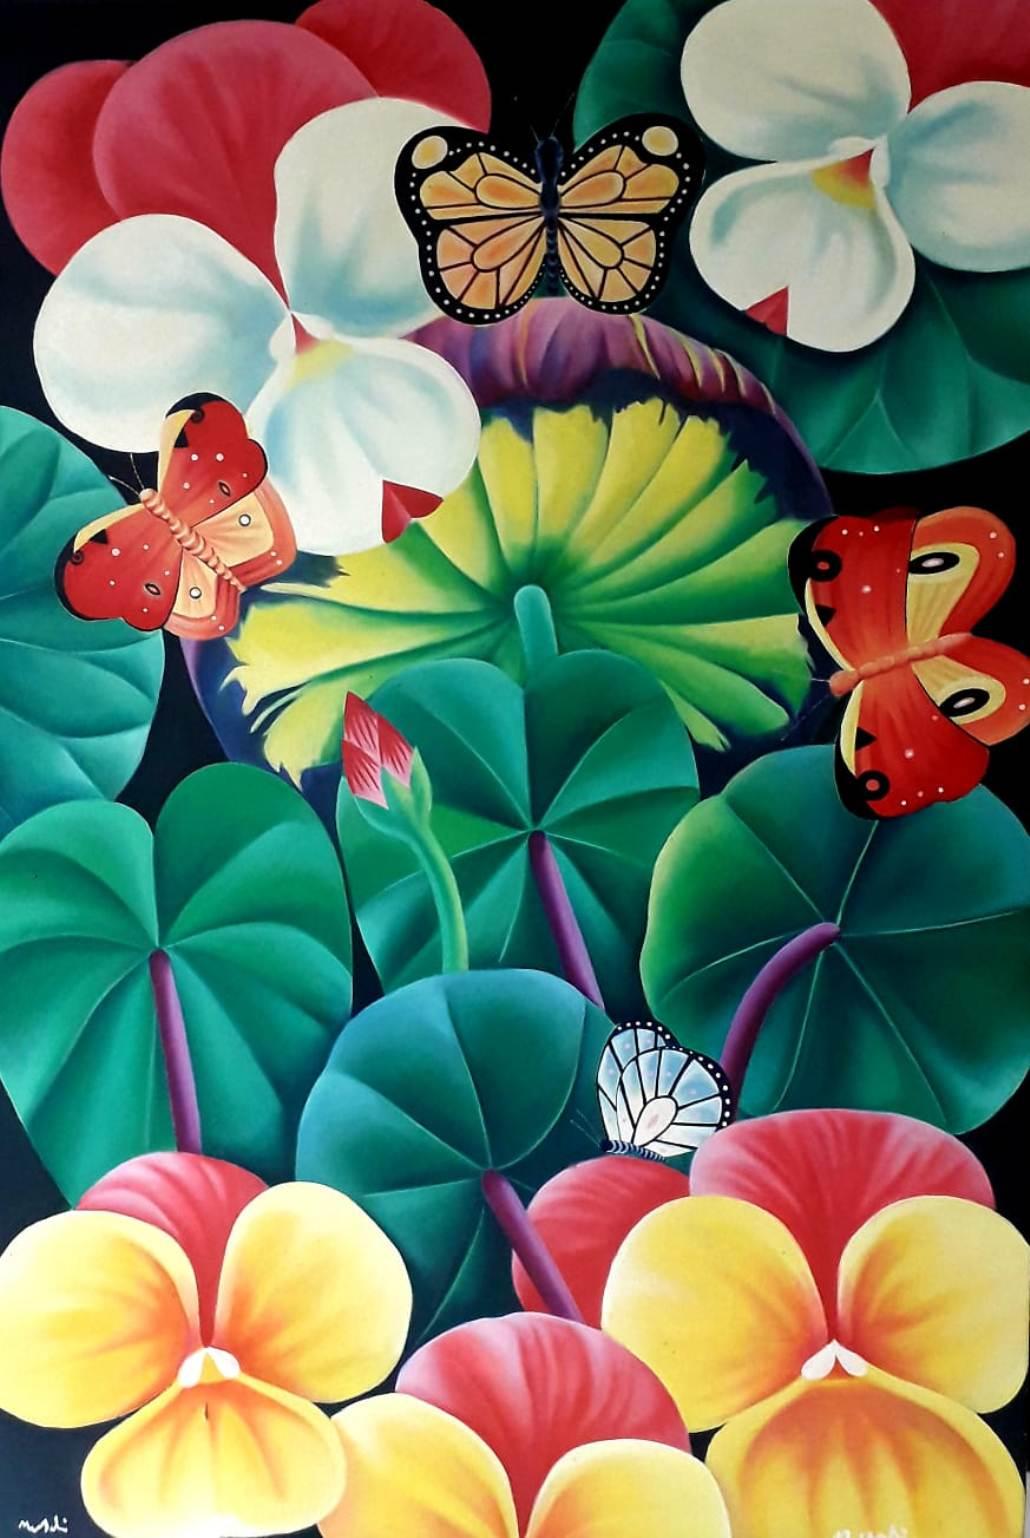 Murali Nagapuzha Landscape Painting - Butterflies, Oil on Canvas, Green, Red by Contemporary Indian Artist "In Stock"